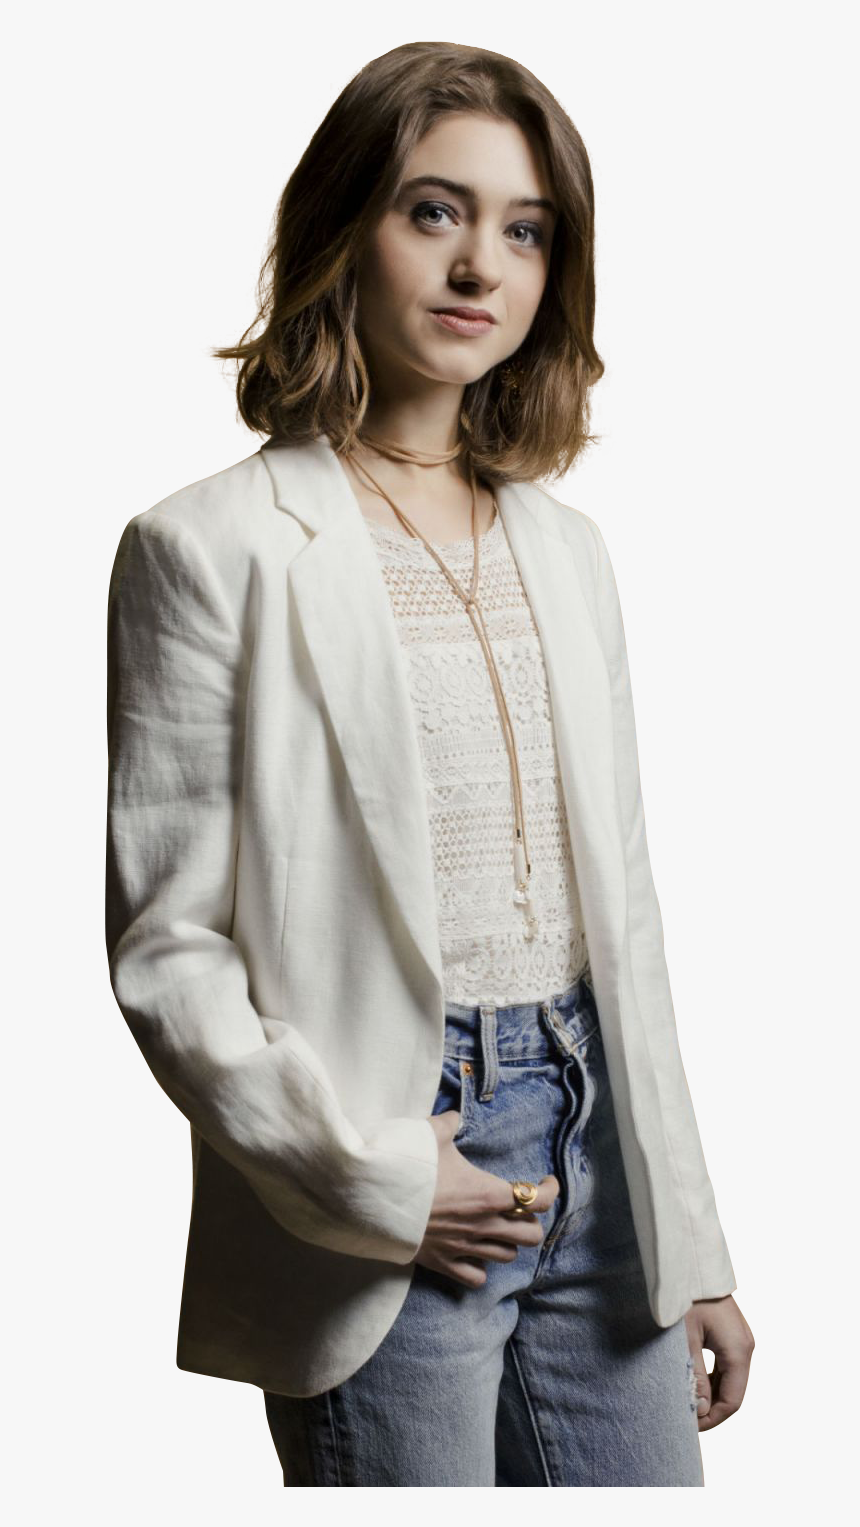 Natalia Dyer Short Hair, HD Png Download, Free Download